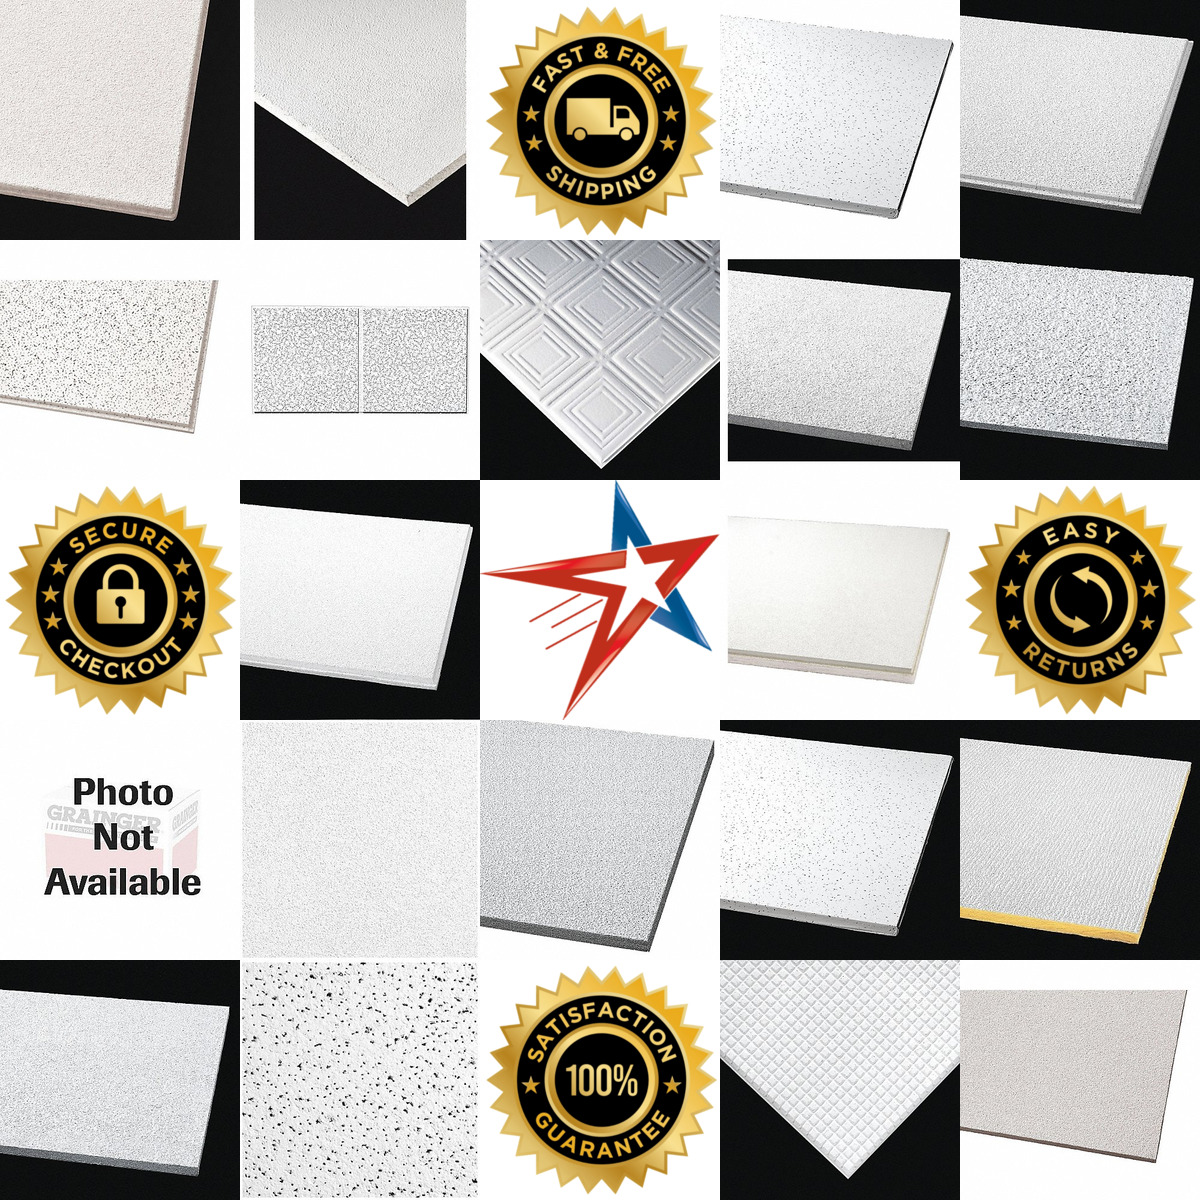 A selection of Ceiling Tiles products on GoVets